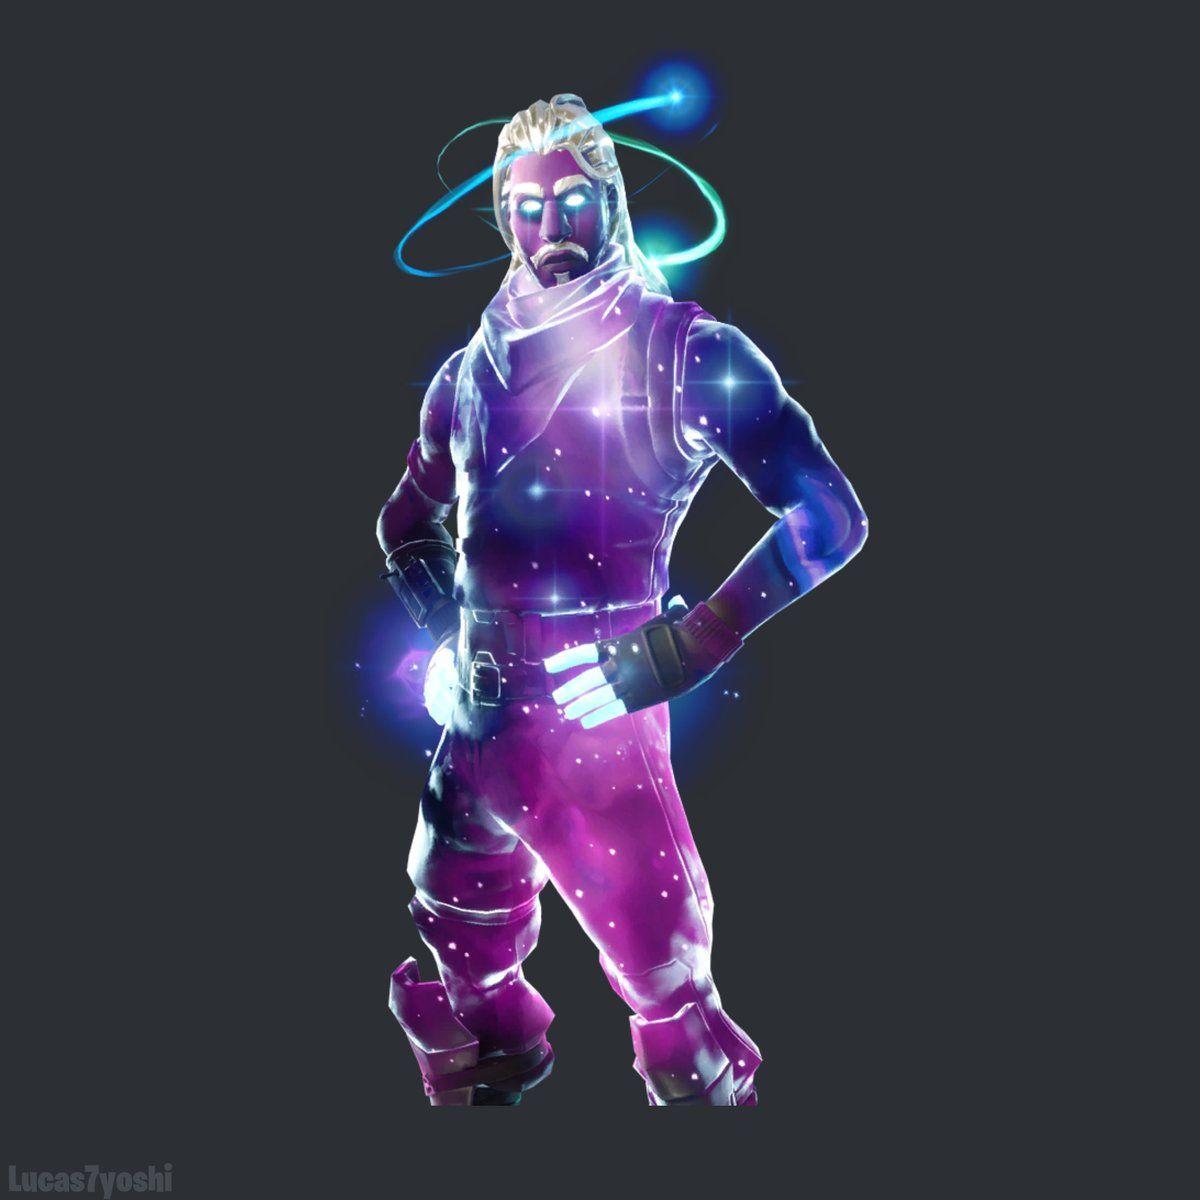 Fortnite Leaked Skins and Cosmetics in Update 5.20 Found By Dataminers